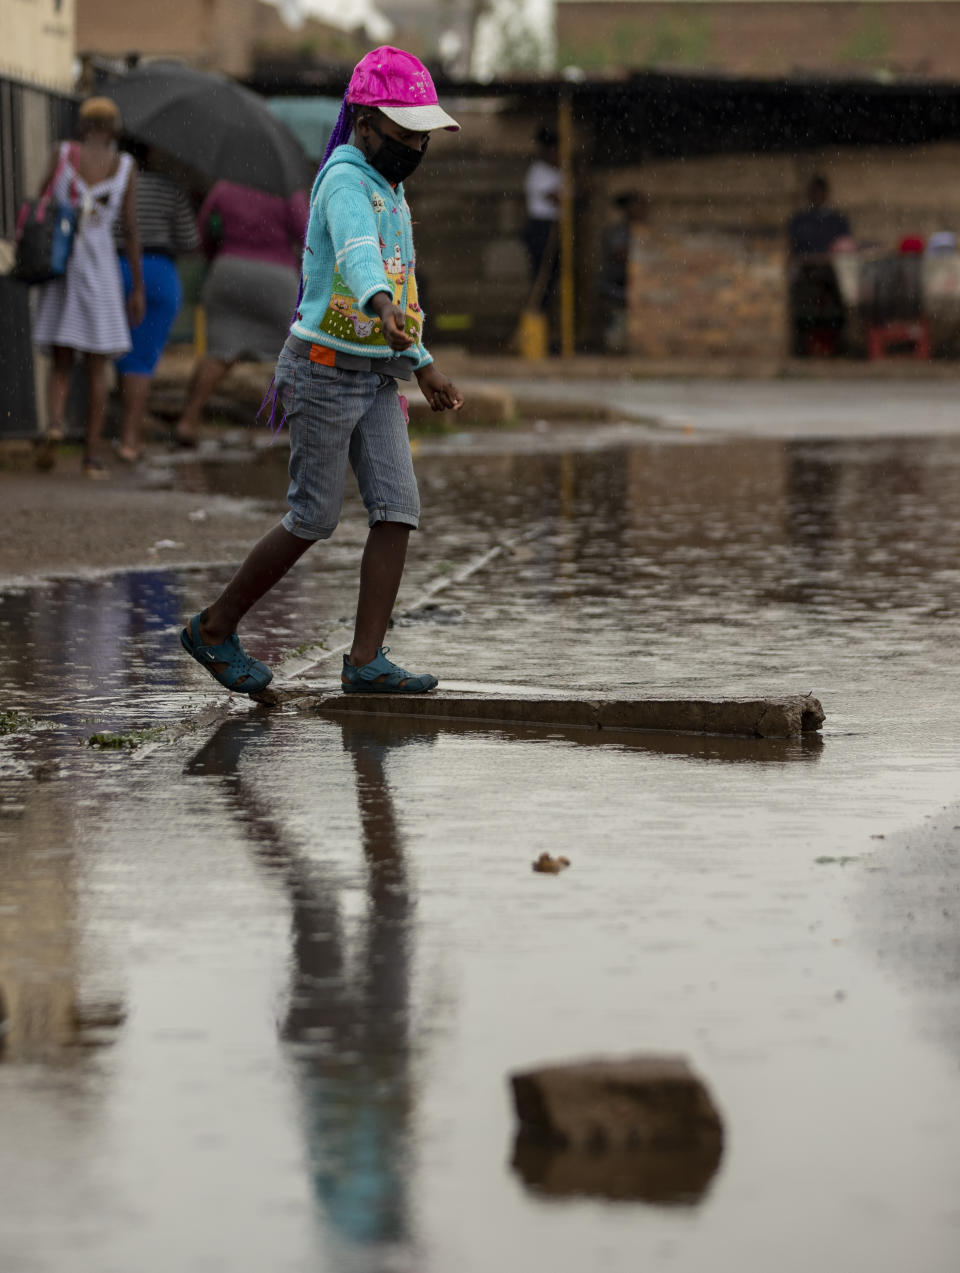 A young girl wearing a mask to help protect themself from the coronavirus crosses a waterlogged street after rainfall in Thokoza, east of Johannesburg, South Africa, Thursday, Jan. 14, 2021. South Africa is struggling to cope with a spike in COVID-19 cases that has already overwhelmed some hospitals, as people returning from widespread holiday travel speed the country's more infectious coronavirus variant. (AP Photo/Themba Hadebe)